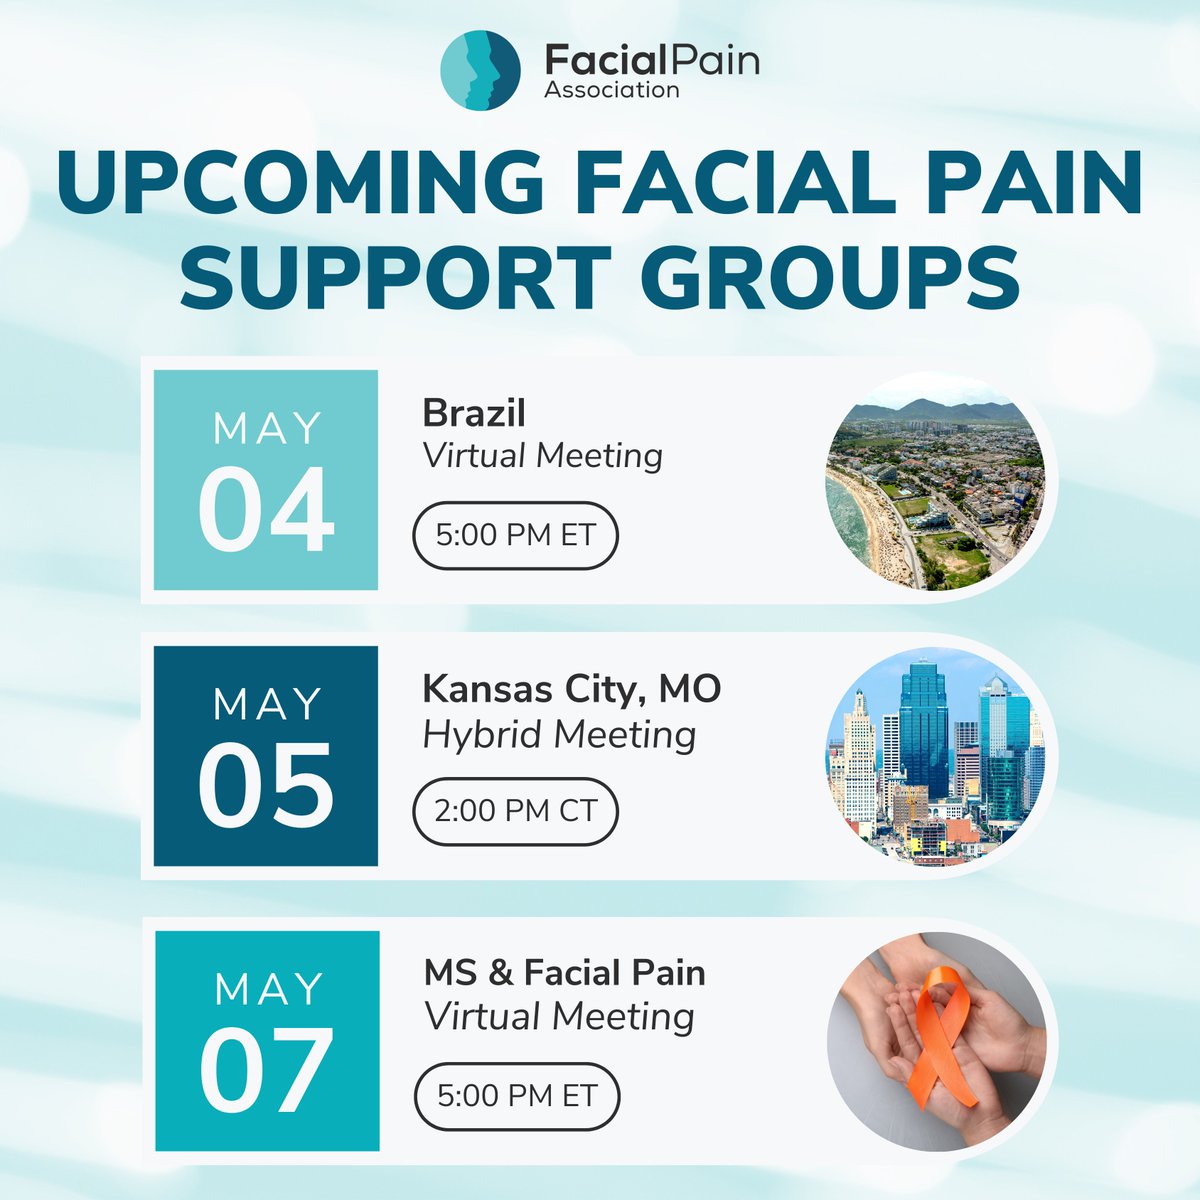 We invite you to join an FPA support group — share your story, ask questions about doctors and treatments, and make new connections! View all upcoming events by visiting facepain.org/find-support/u…